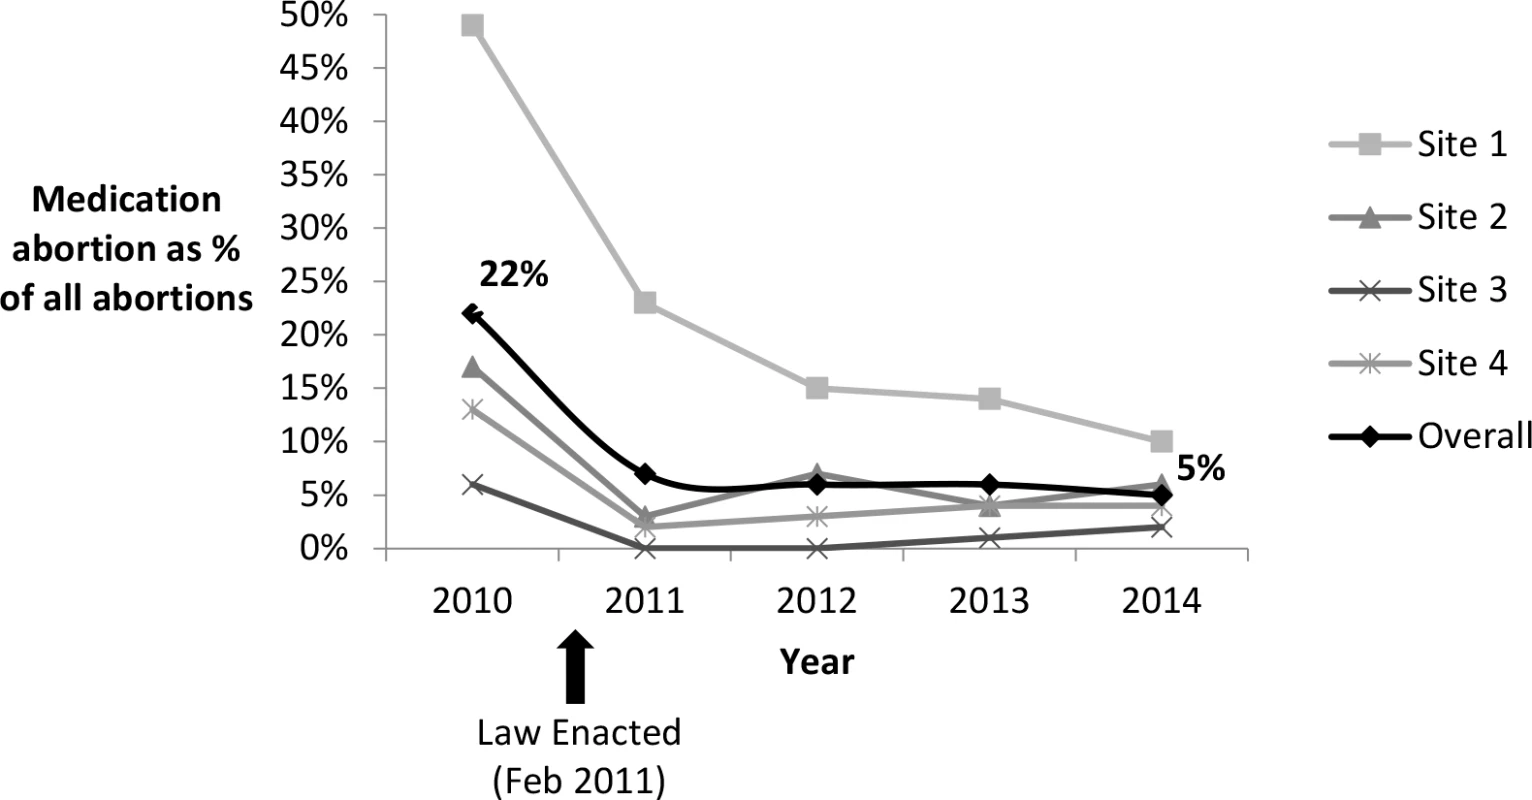 Proportion of abortions that were medication abortions at four Ohio facilities, 2010–2014.